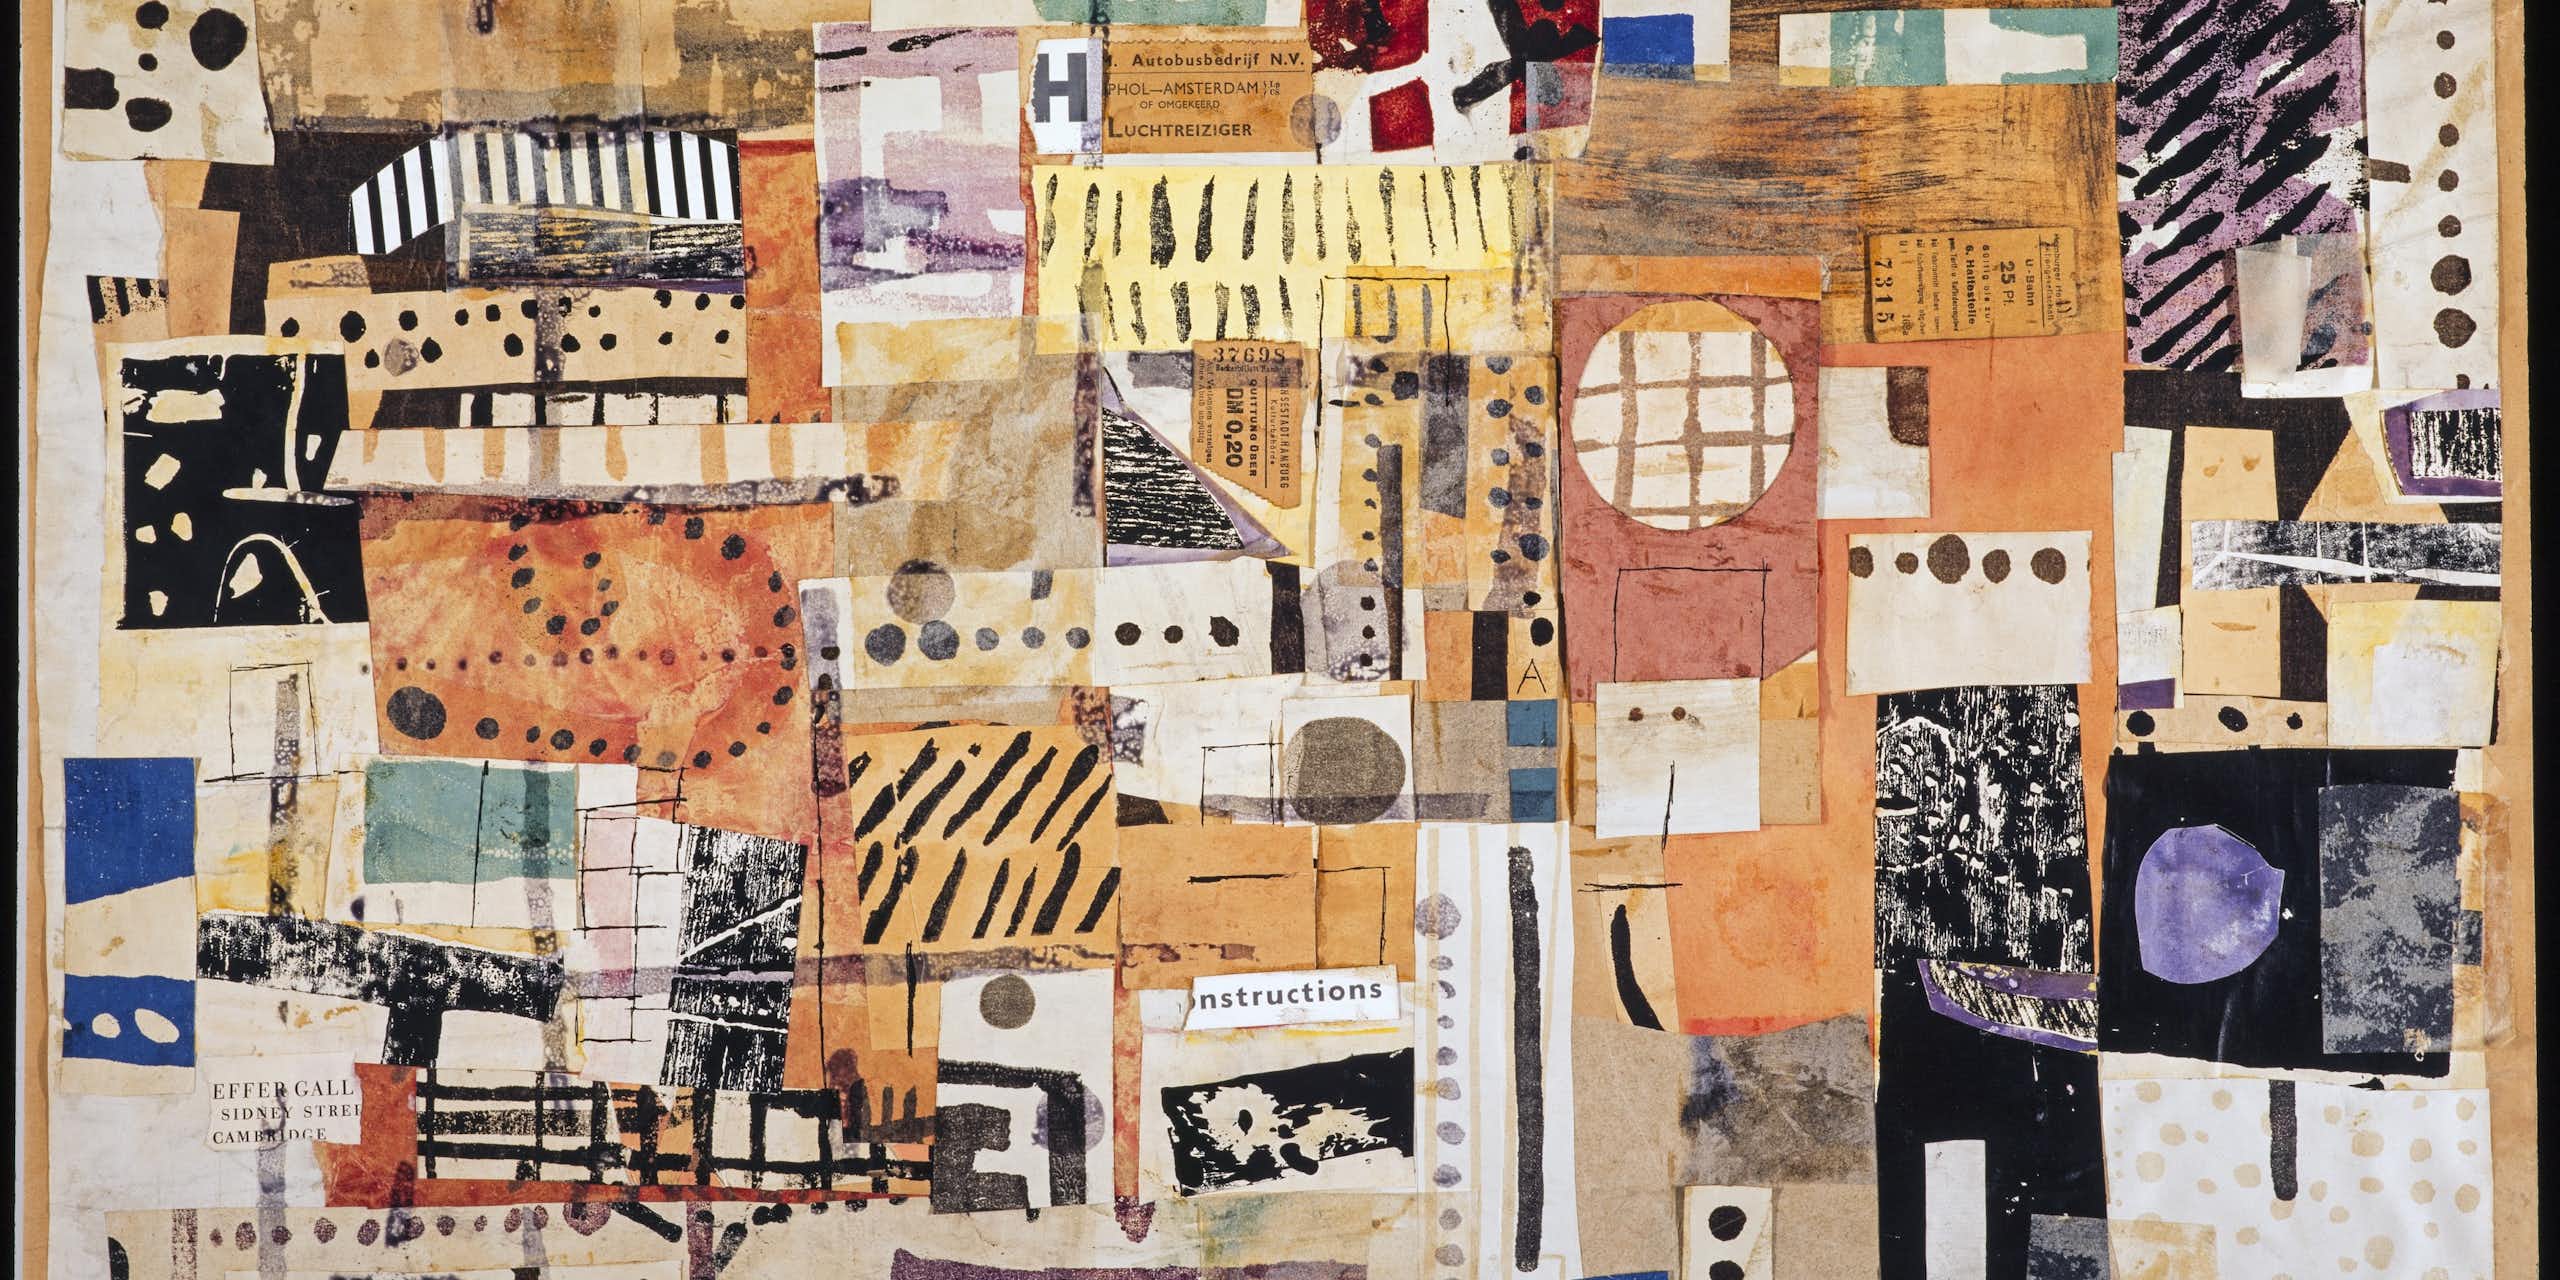 A collage by Paolozzi